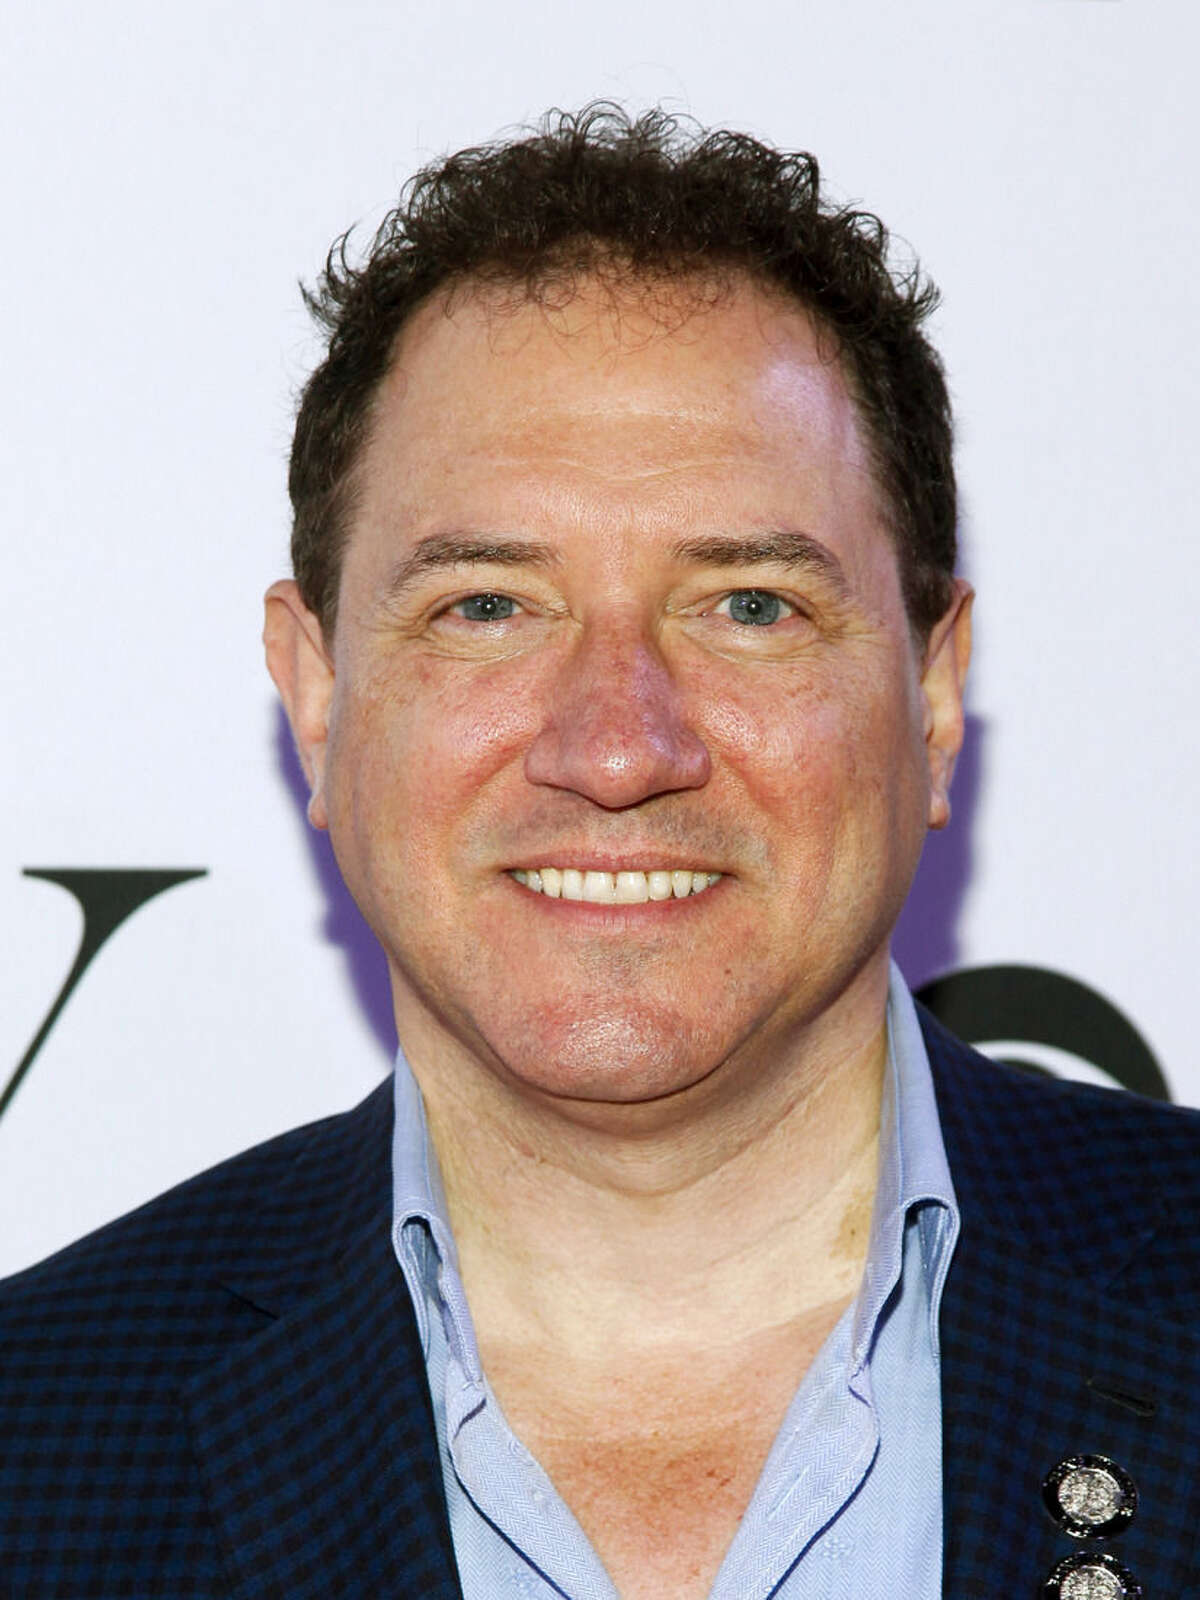 FILE - In this April 29, 2015, file photo, Kevin McCollum attends the 2015 Tony Awards Meet The Nominees Press Junket at The Paramount Hotel in New York. McCollum shepherded the dark, violent play "Hand to God," featuring a satanic hand puppet, and the sunny "Something Rotten!" a musical celebrating musicals. (Photo by Andy Kropa/Invision/AP, File)